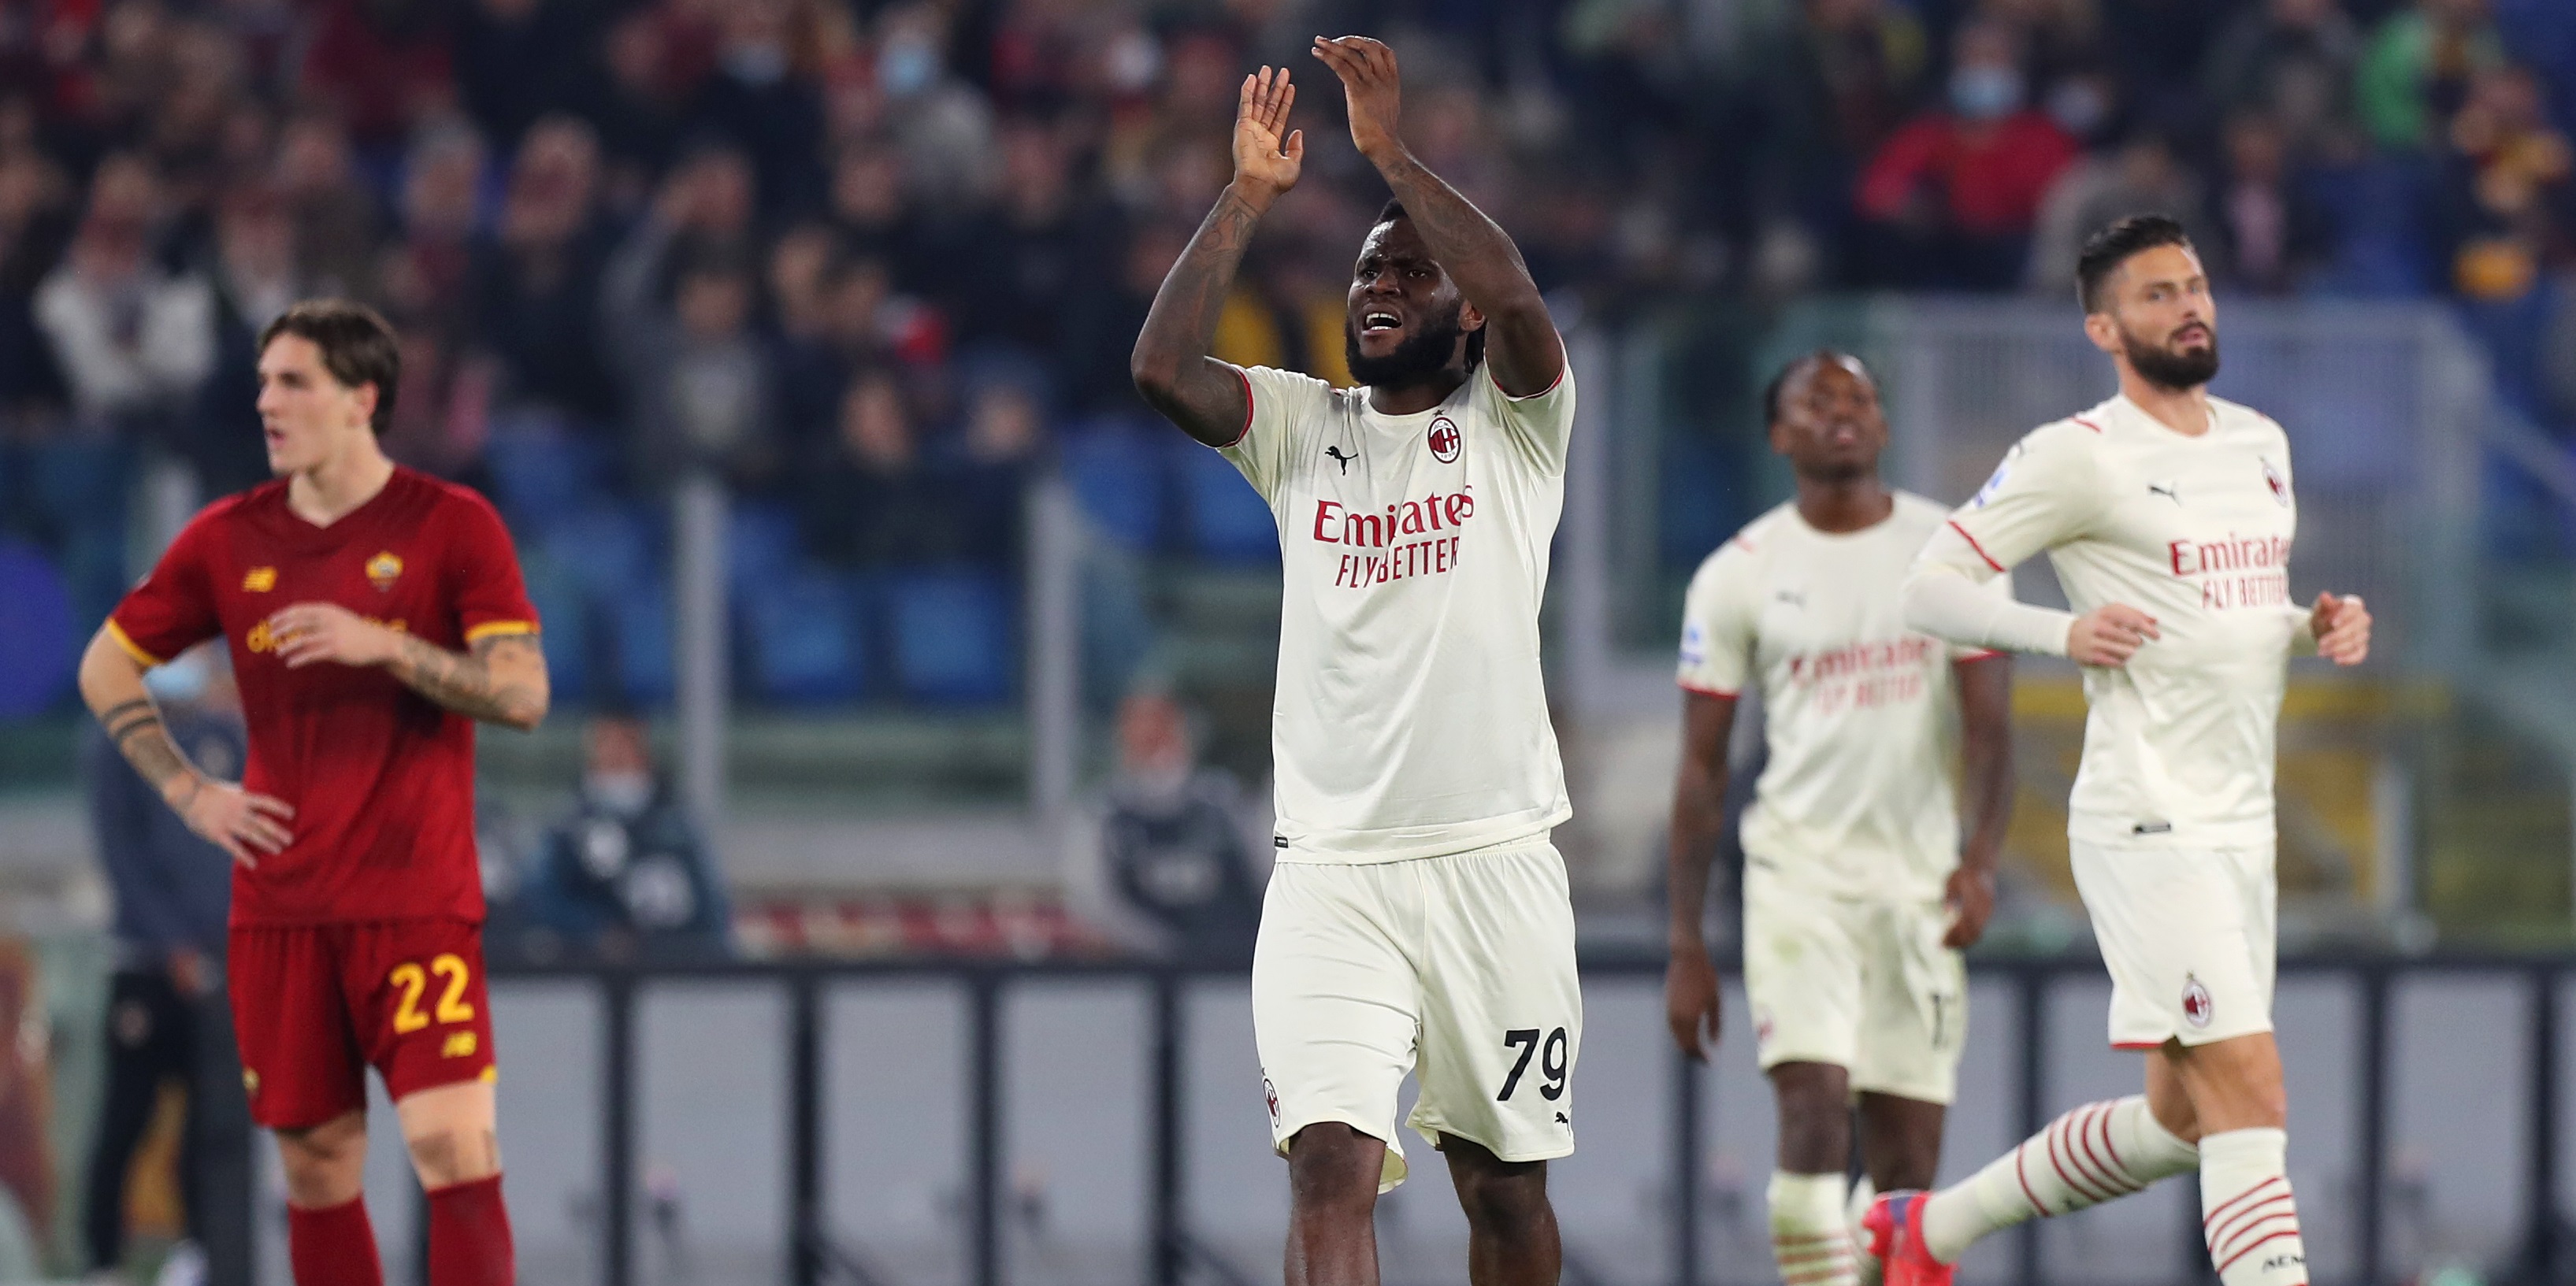 Exclusive: Two PL clubs ‘interested’ in Liverpool-linked Franck Kessie as agent goes rogue over commission fee